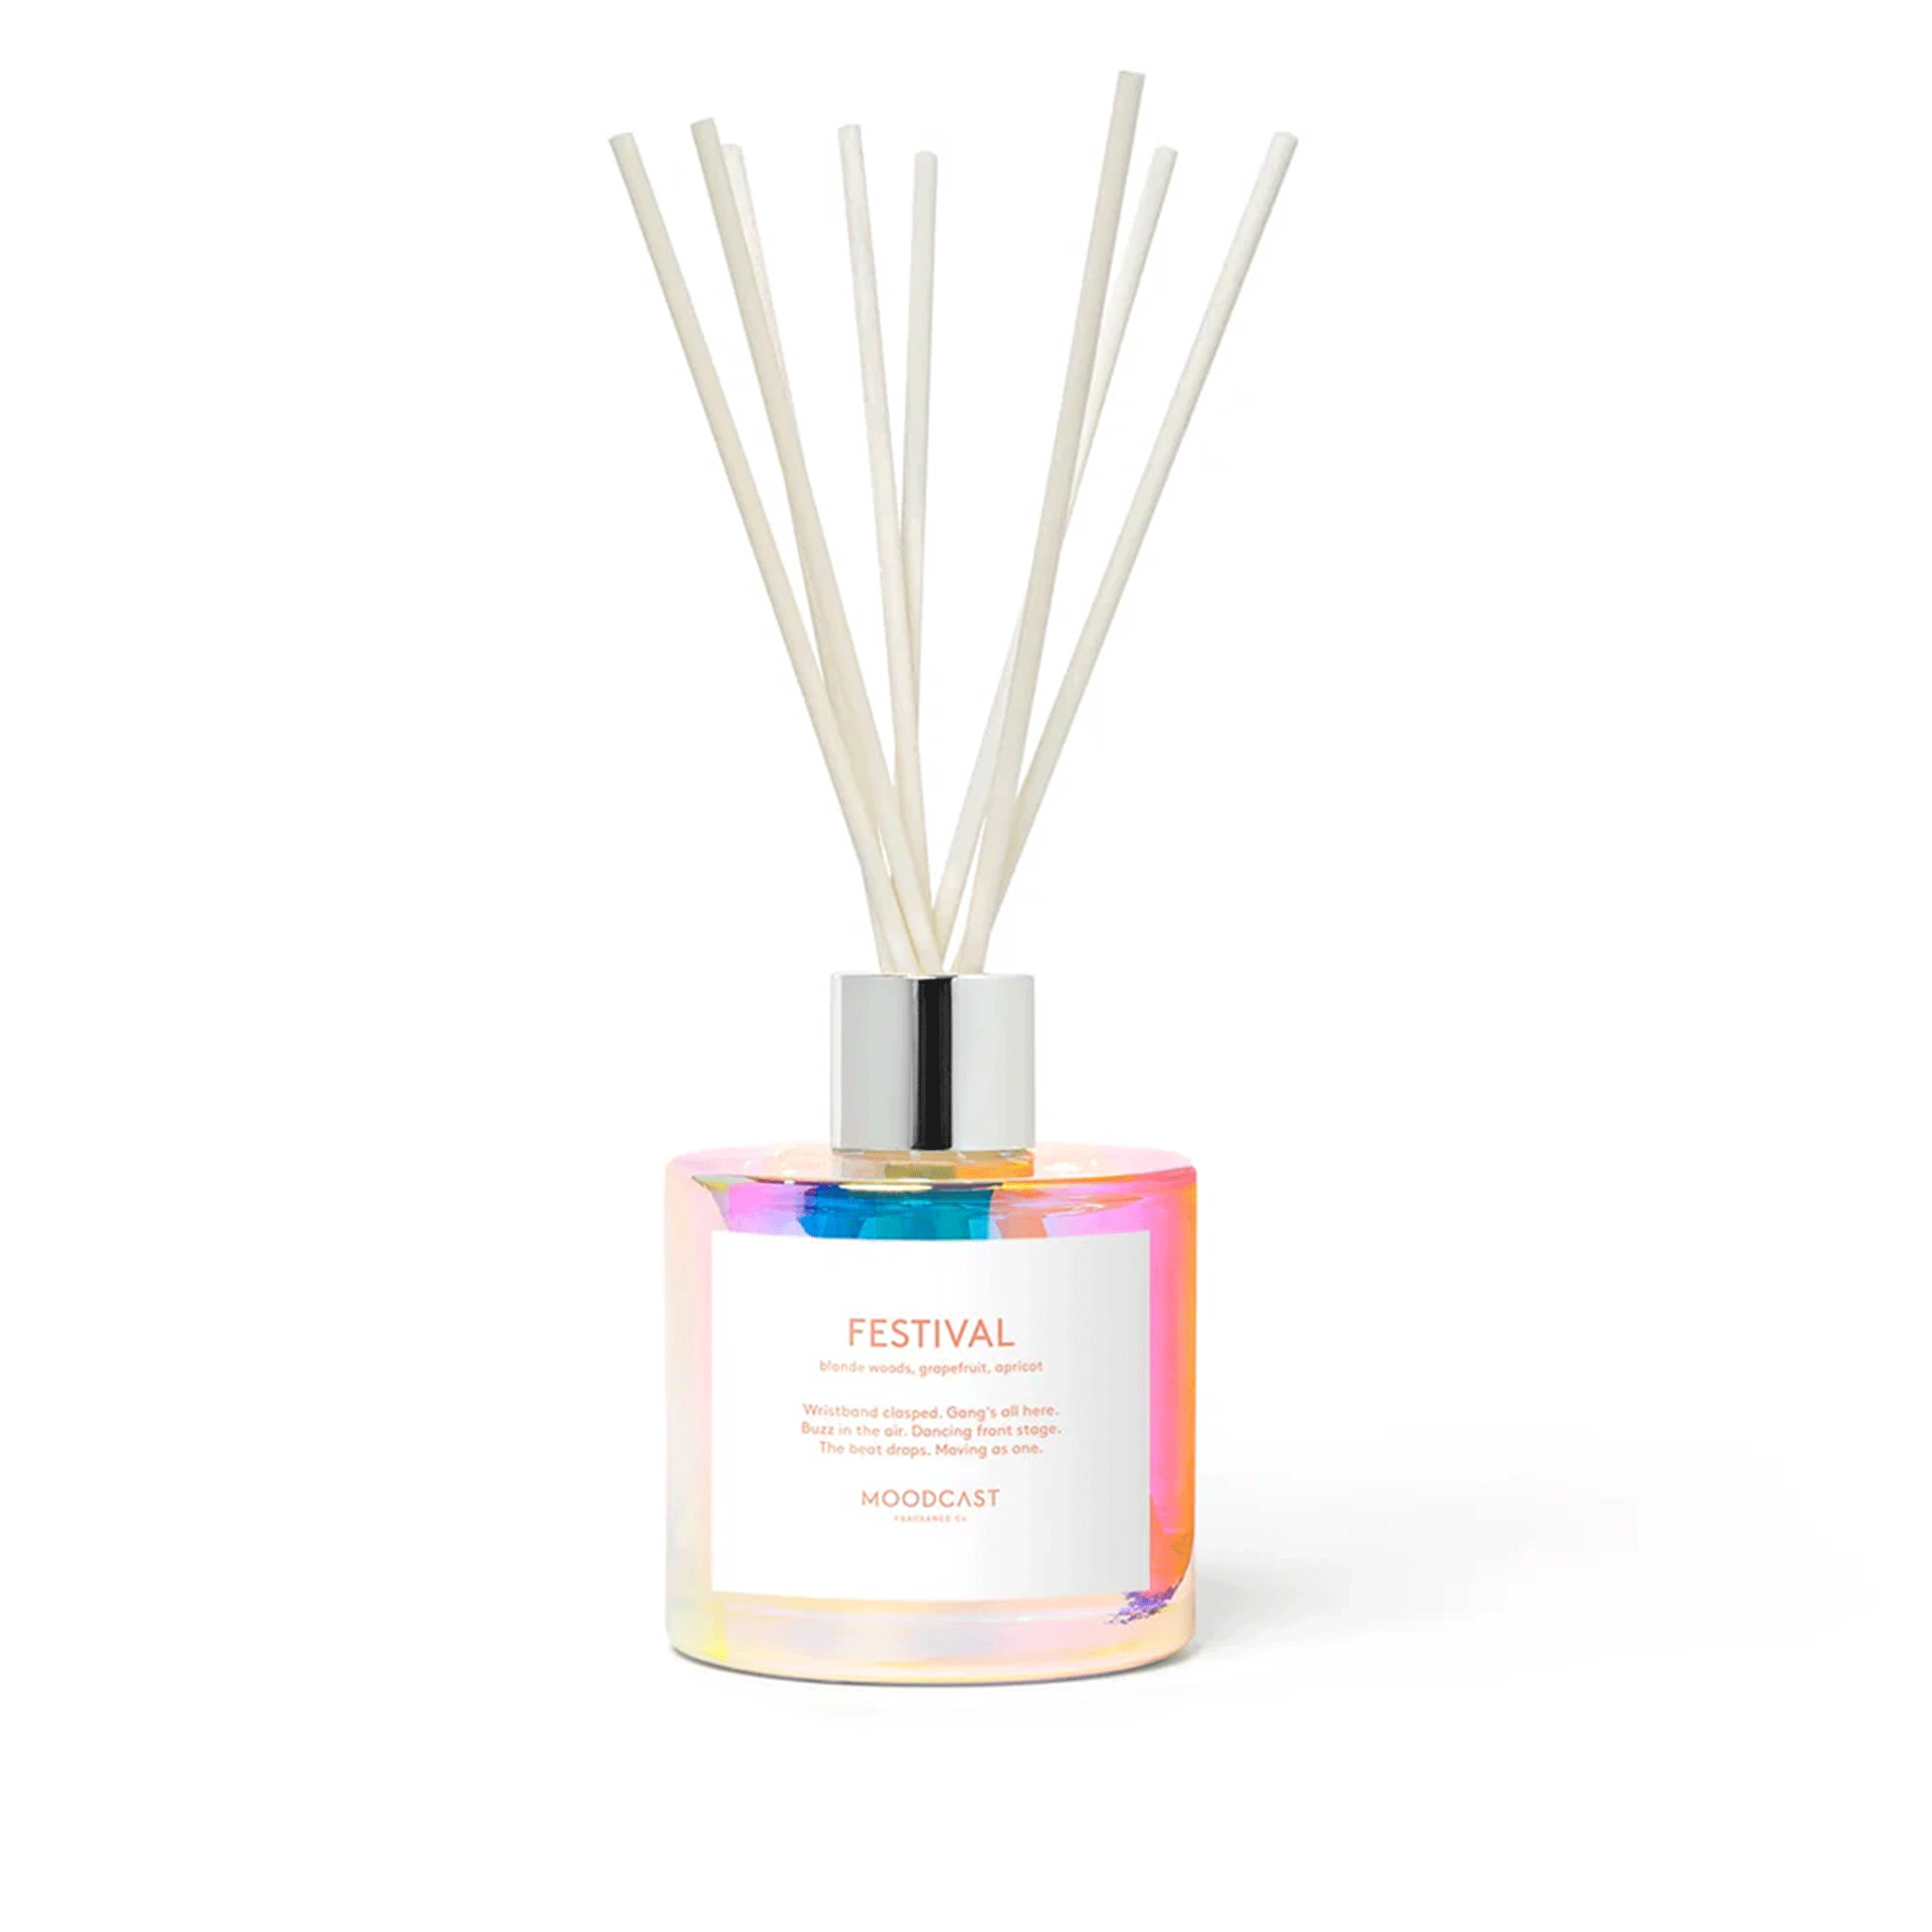 On a white background is a multi-colored glass container with reed diffusers.